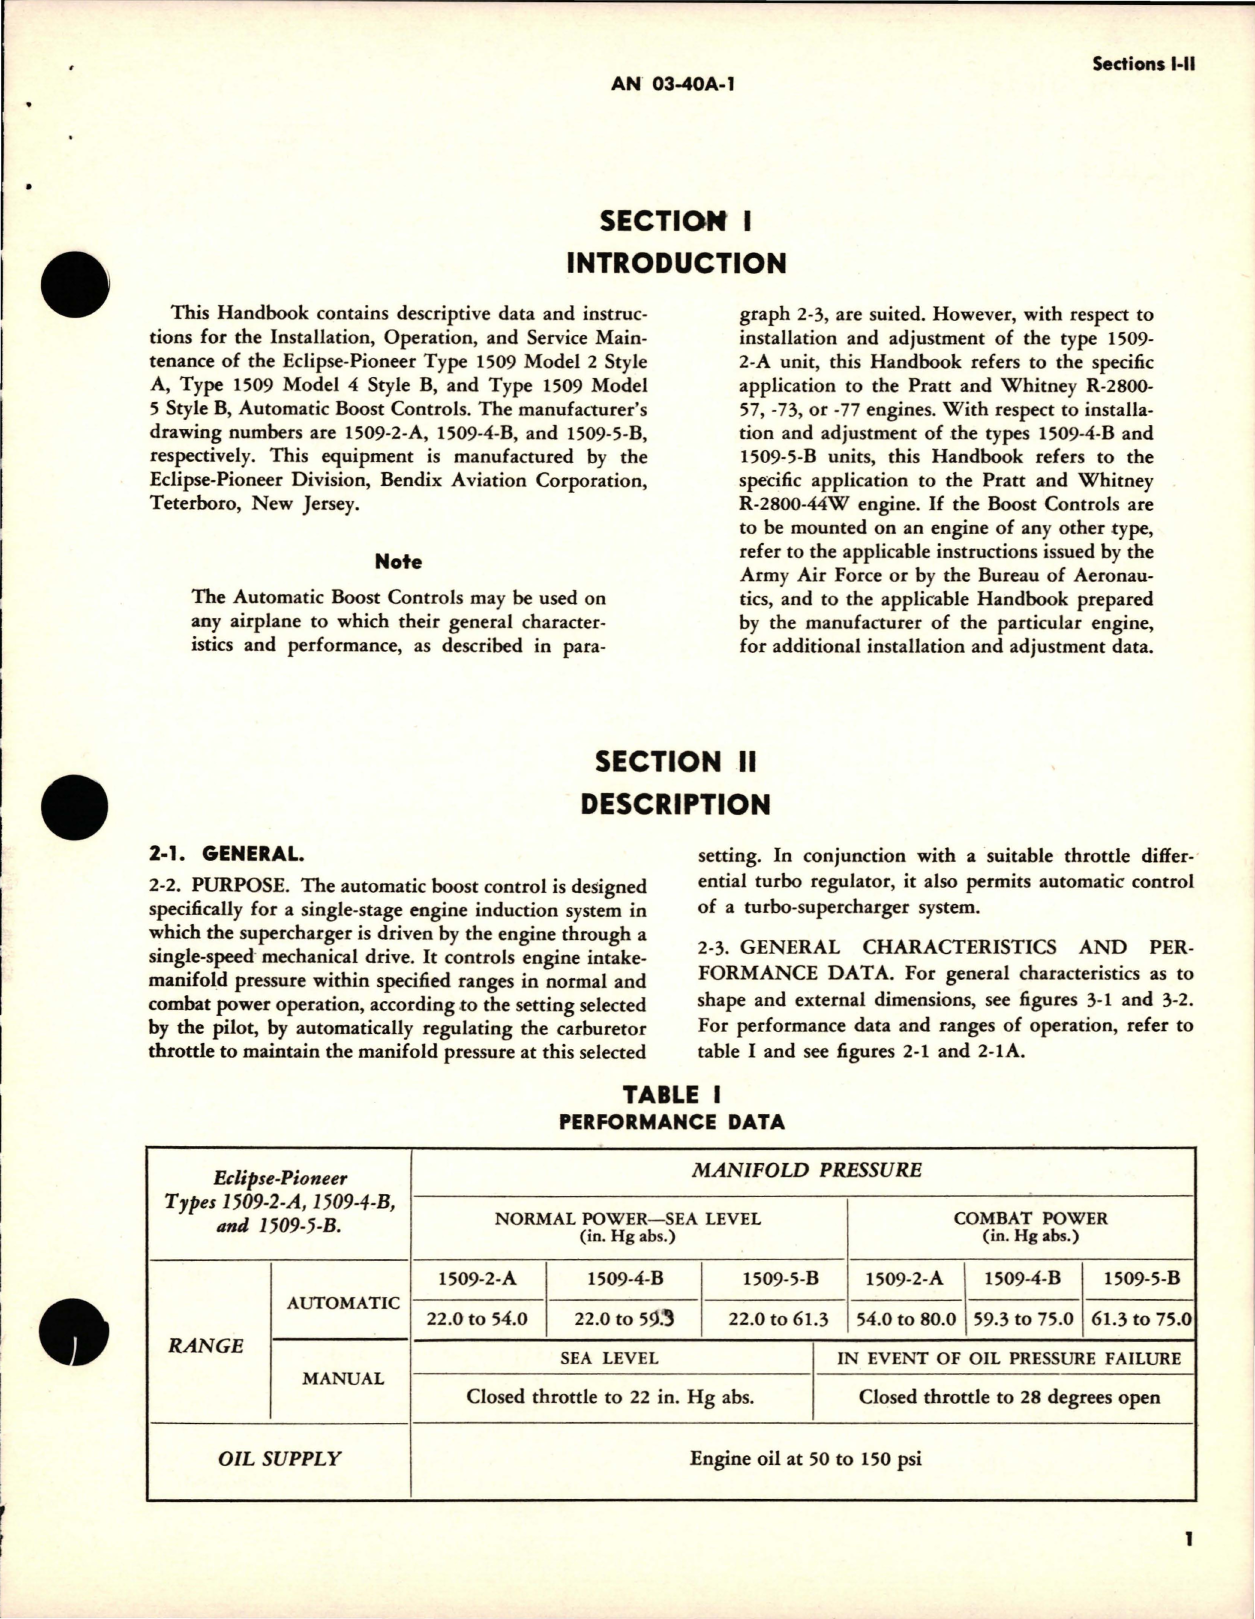 Sample page 7 from AirCorps Library document: Operation and Service Instructions for Automatic Boost Control - Types 1509-2-A, 1509-4-B, and 1509-5-B 